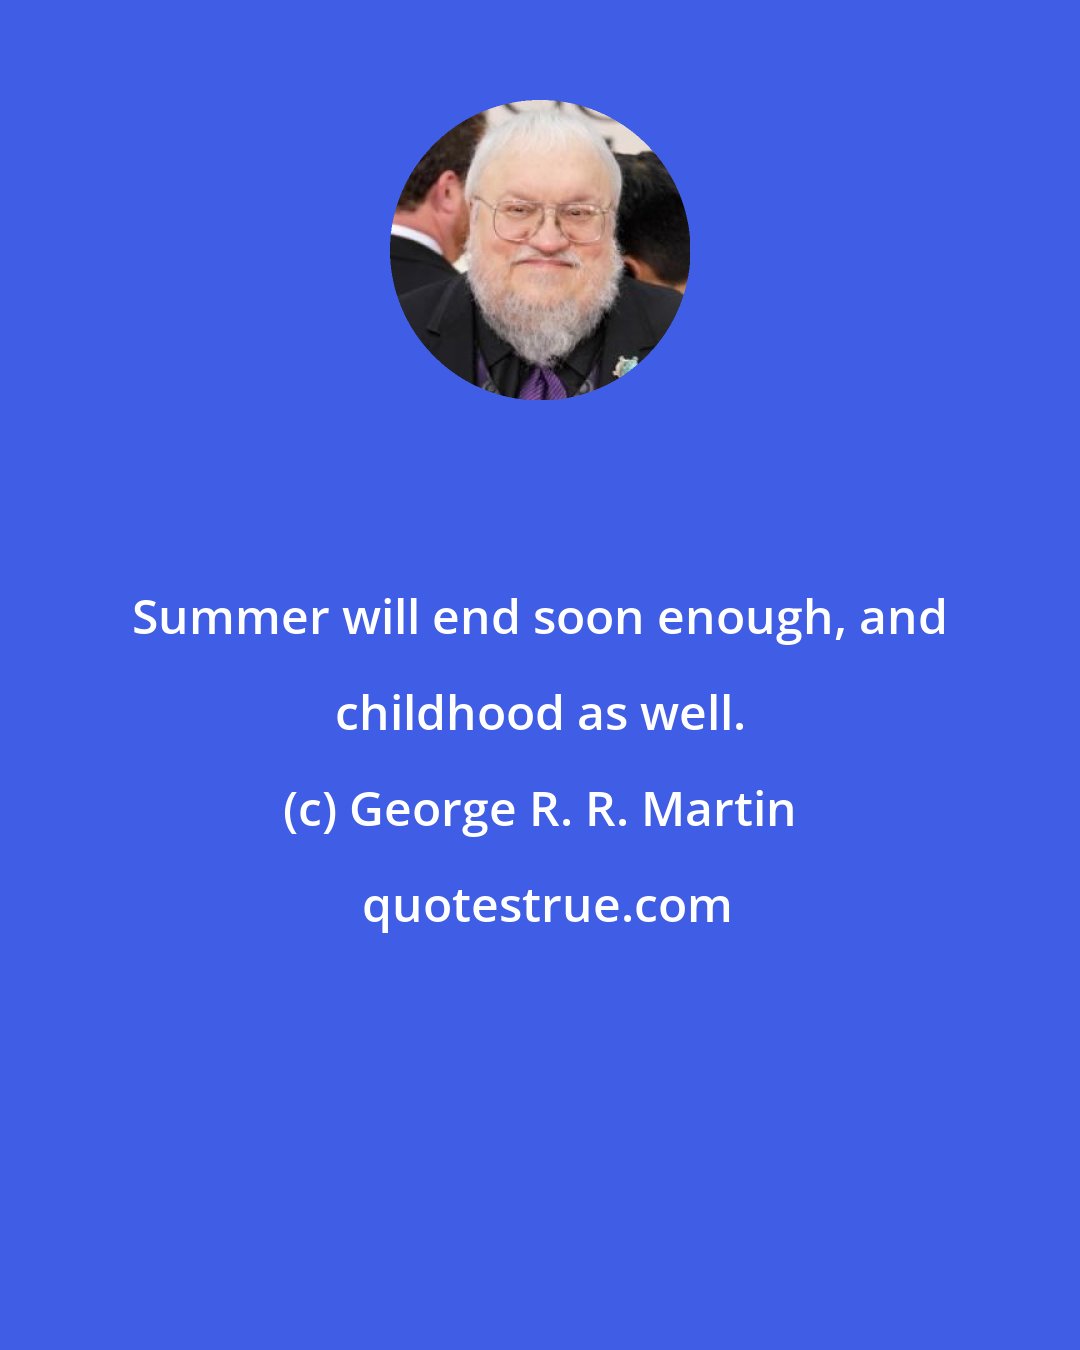 George R. R. Martin: Summer will end soon enough, and childhood as well.